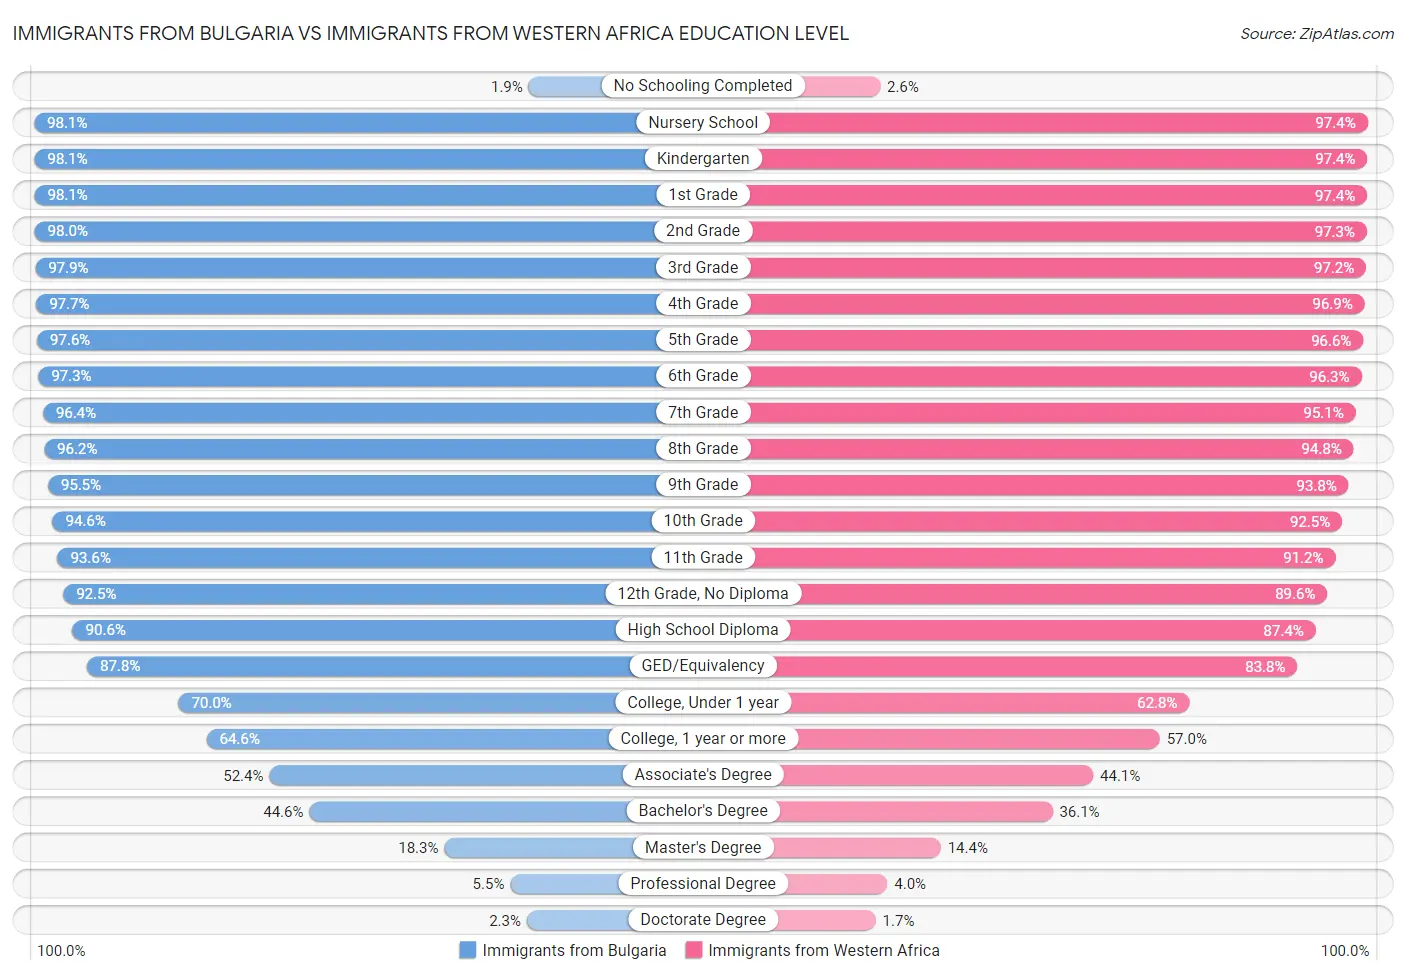 Immigrants from Bulgaria vs Immigrants from Western Africa Education Level